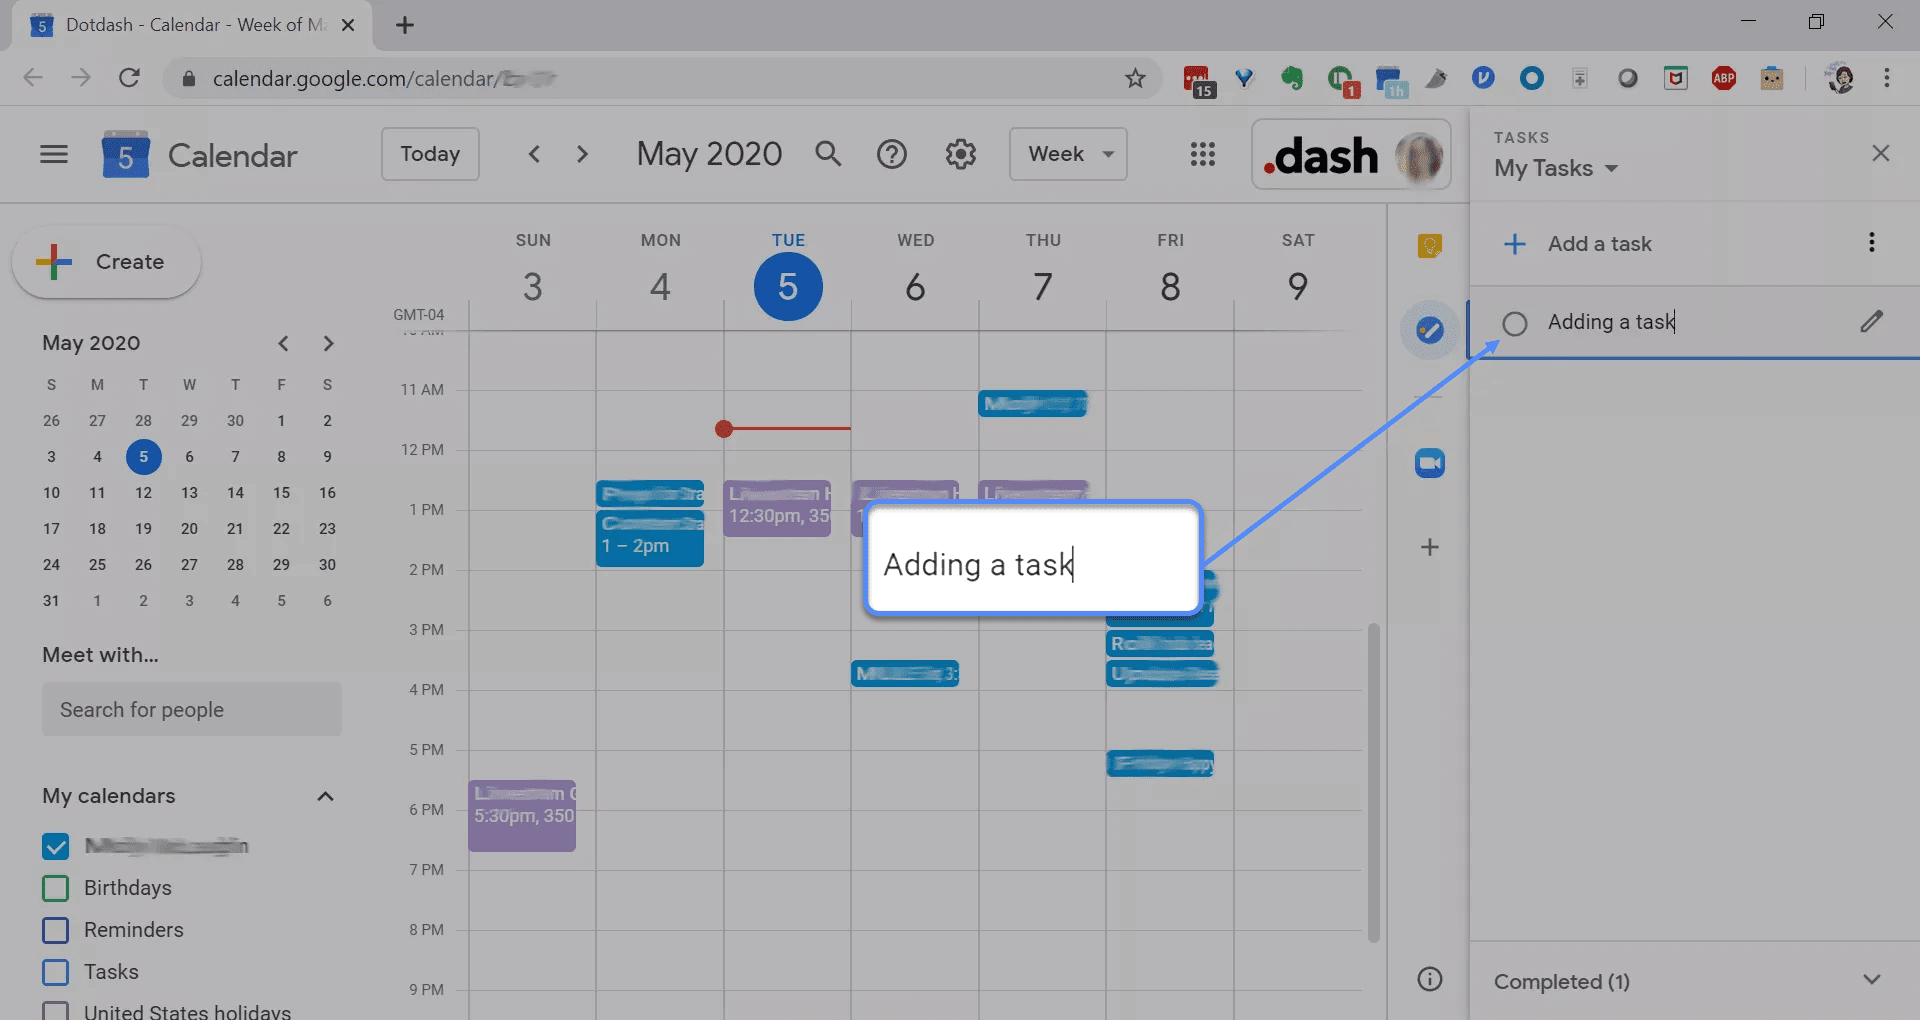 How to Add a Task to Google Calendar?